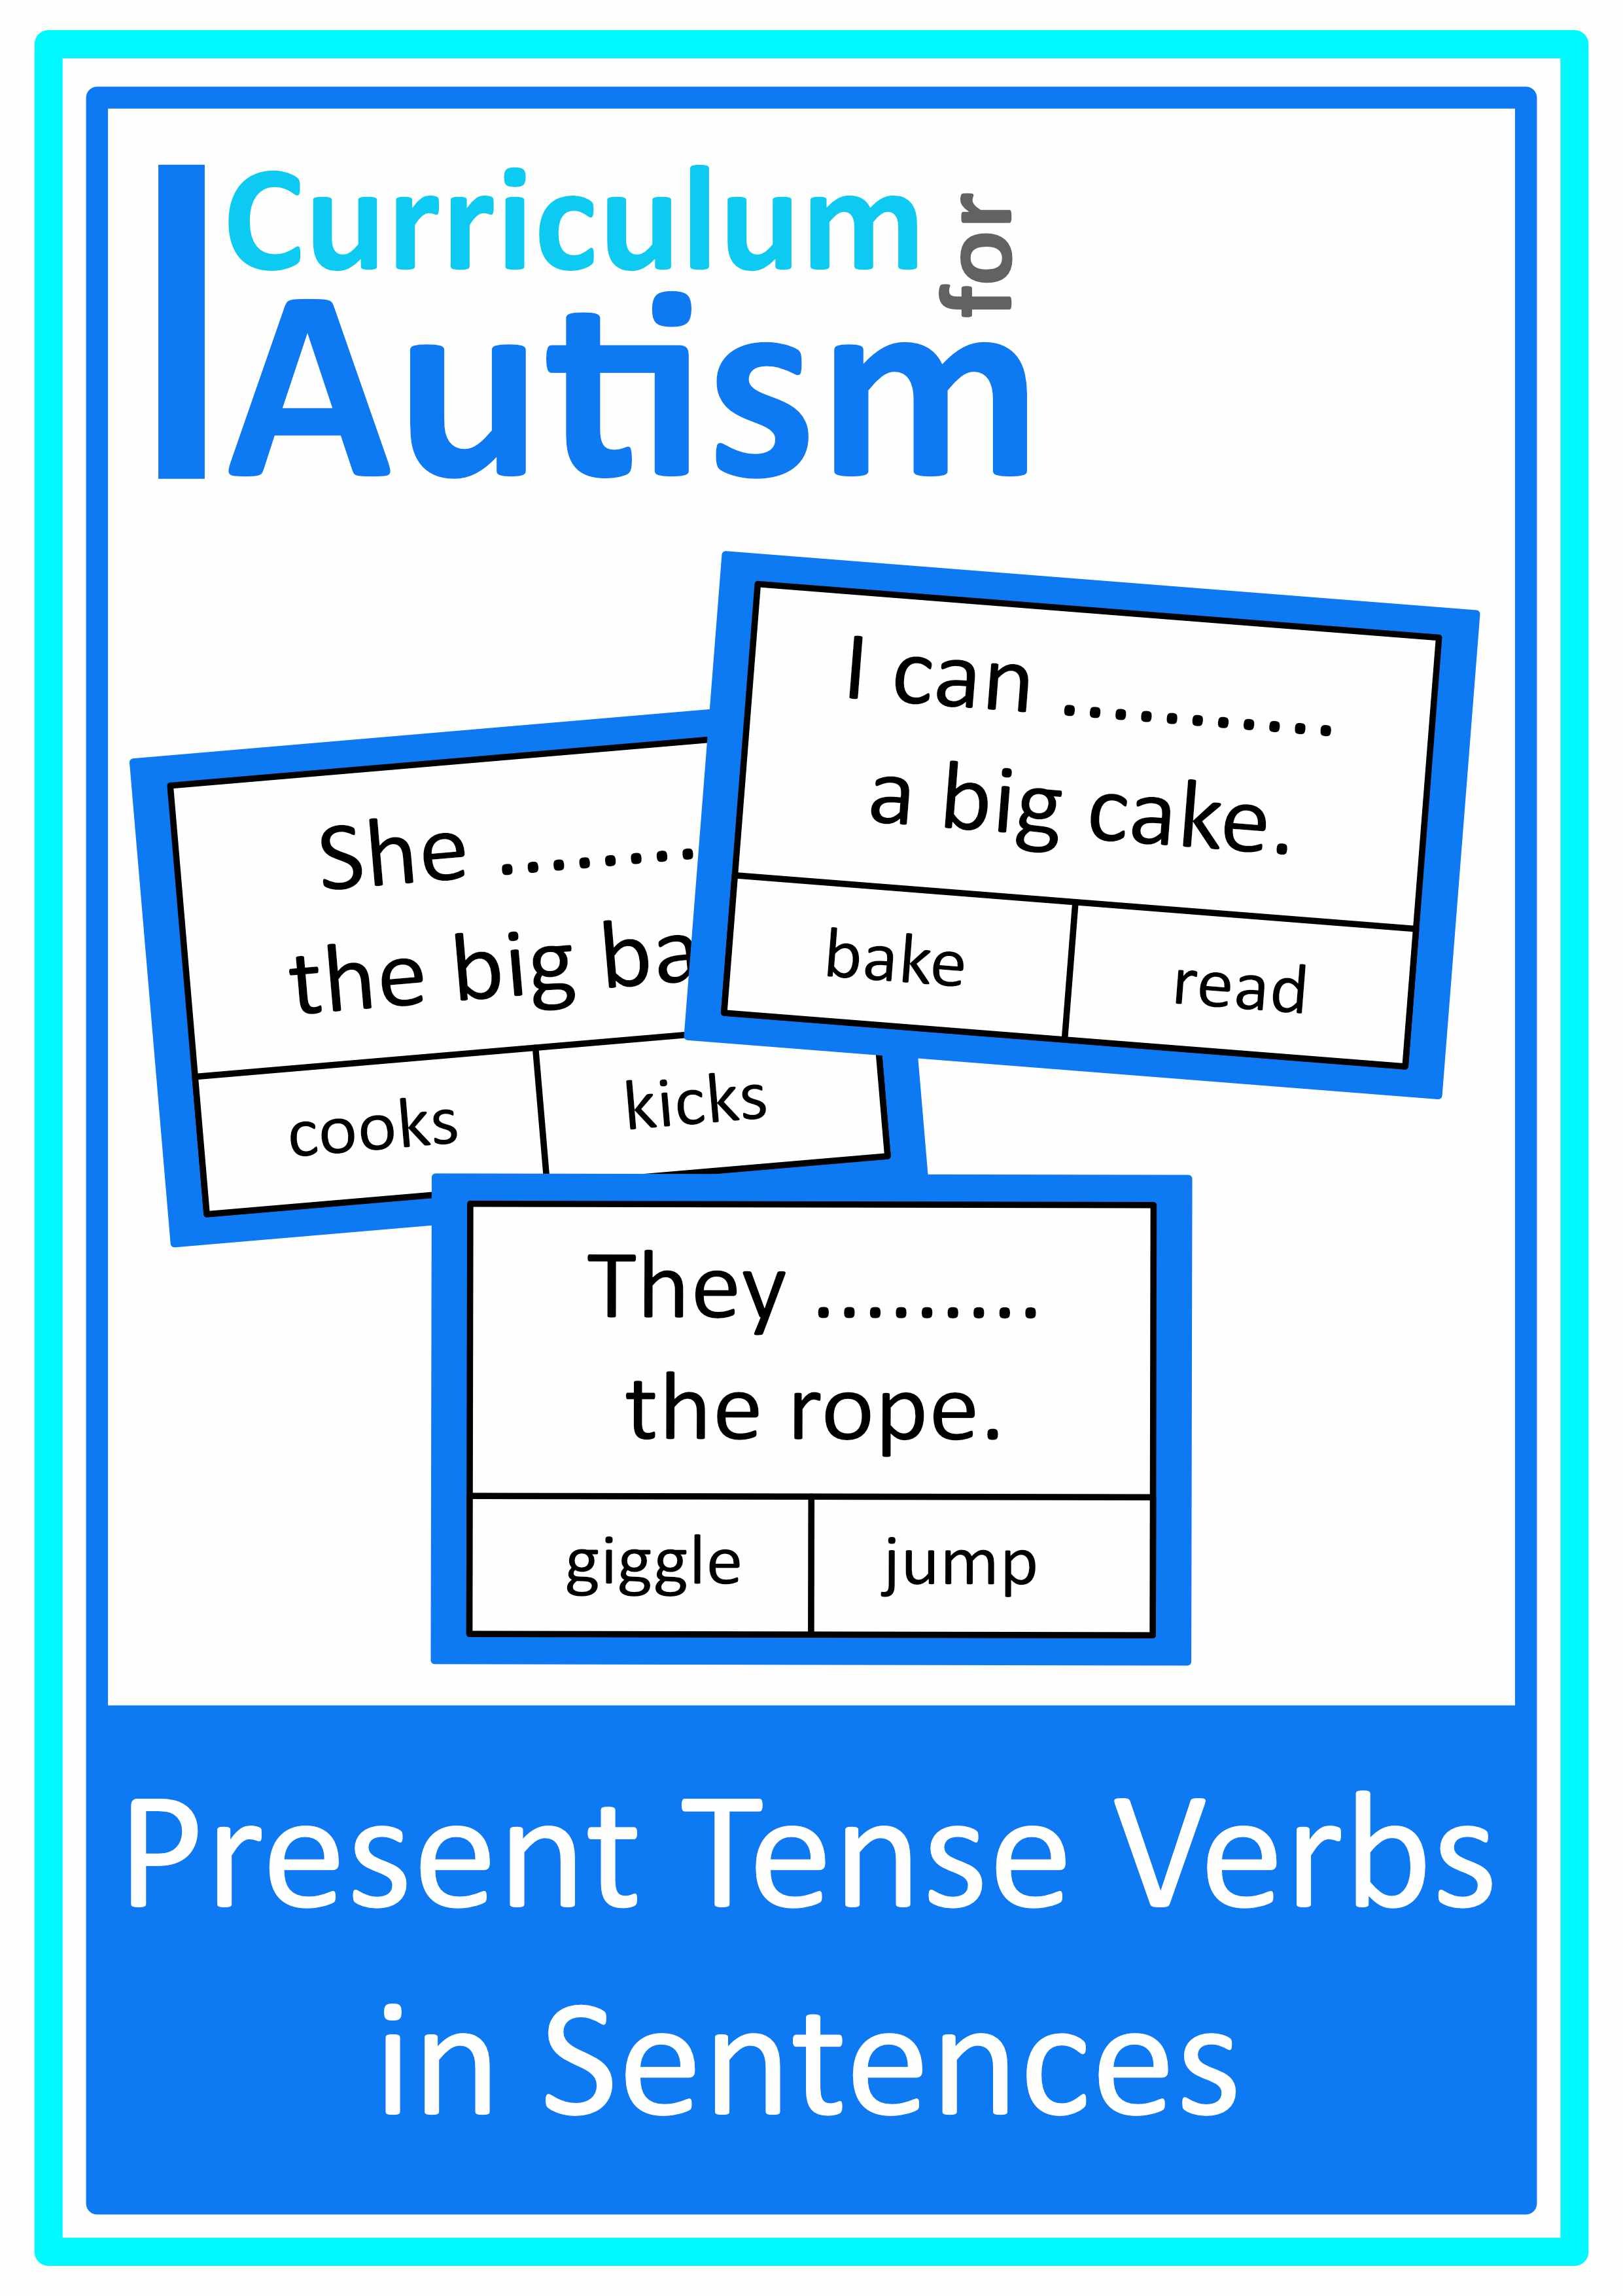 sentence-comprehension-cards-worksheets-autism-special-education-resource-classroom-homeschool